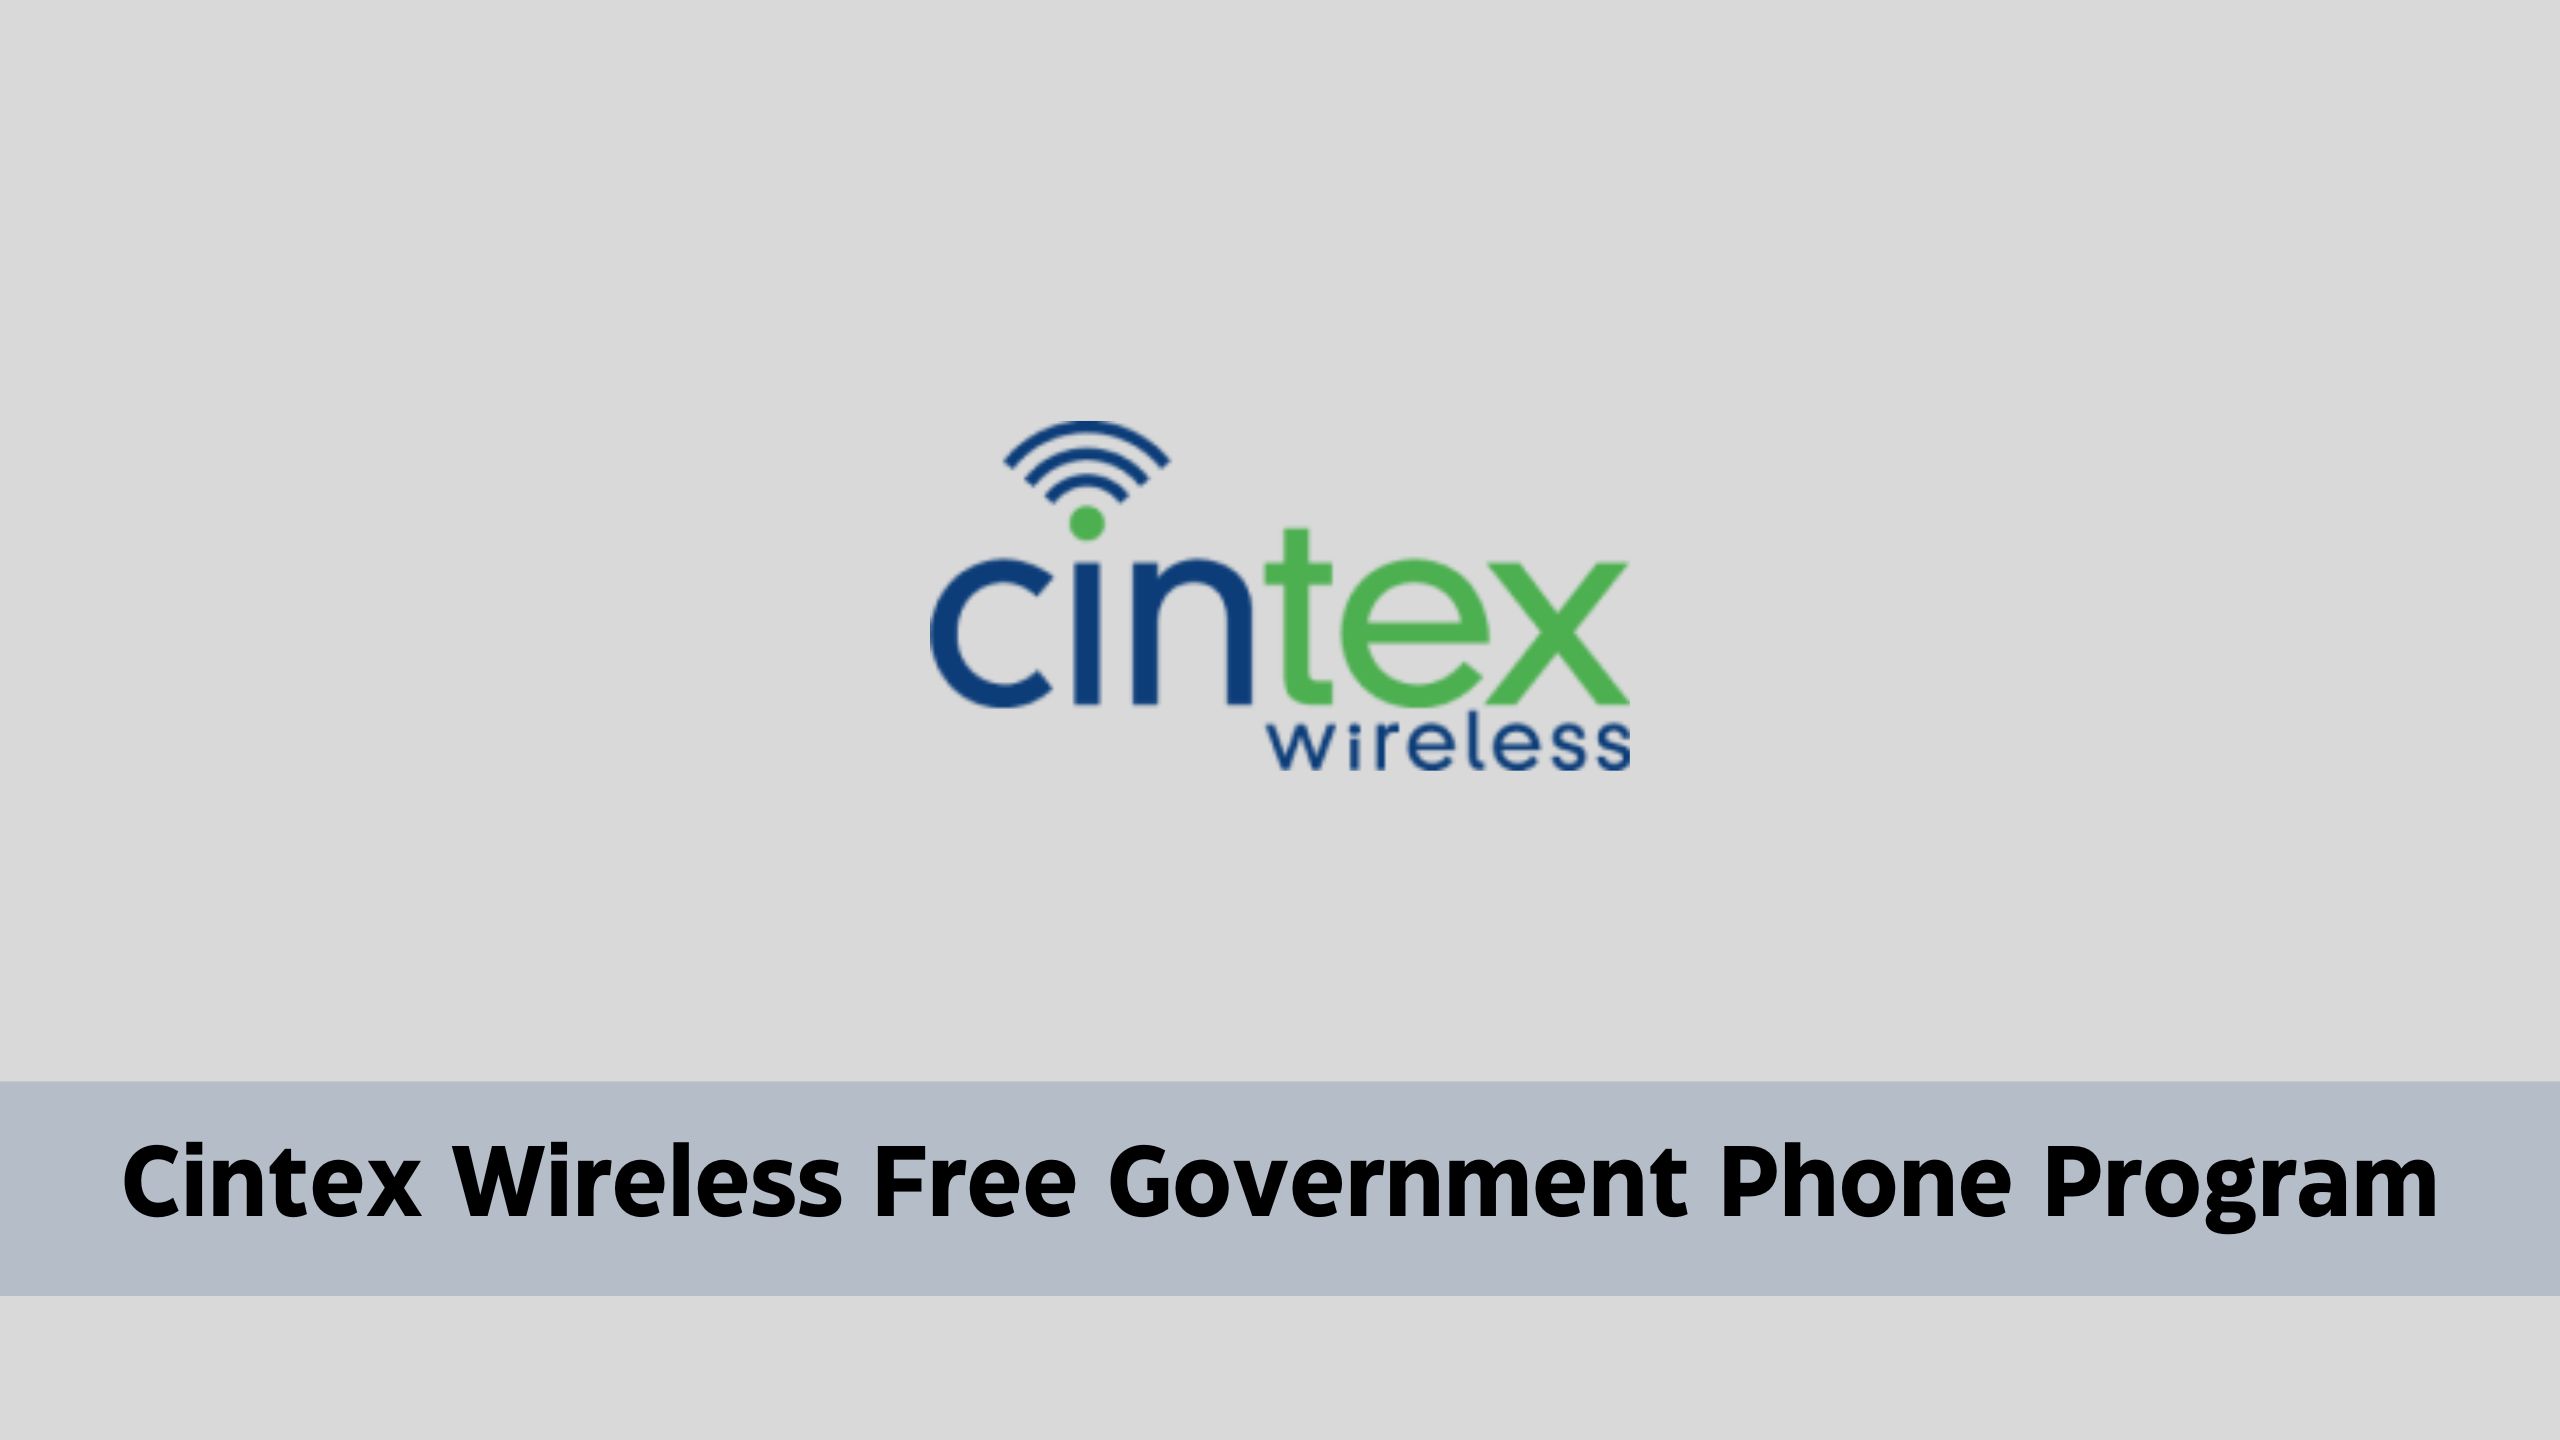 Cintex Wireless Free Government Phone (iPhone & Samsung) Application Guide | Qualify, Apply, Check Status